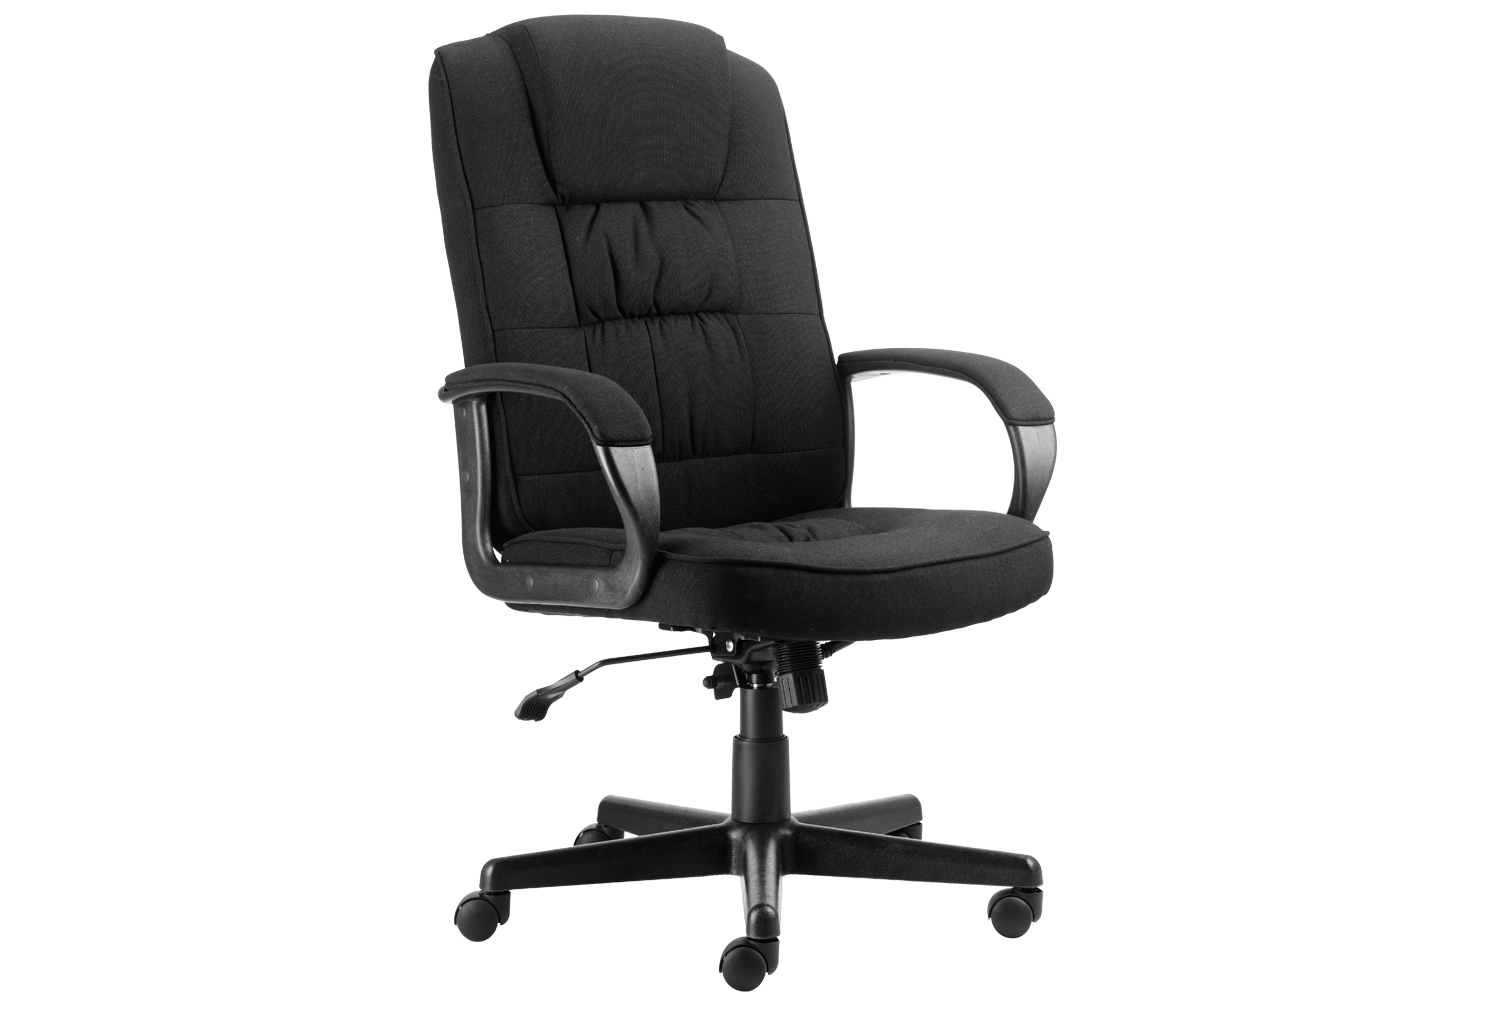 Muscat Fabric Executive Office Chair, Black